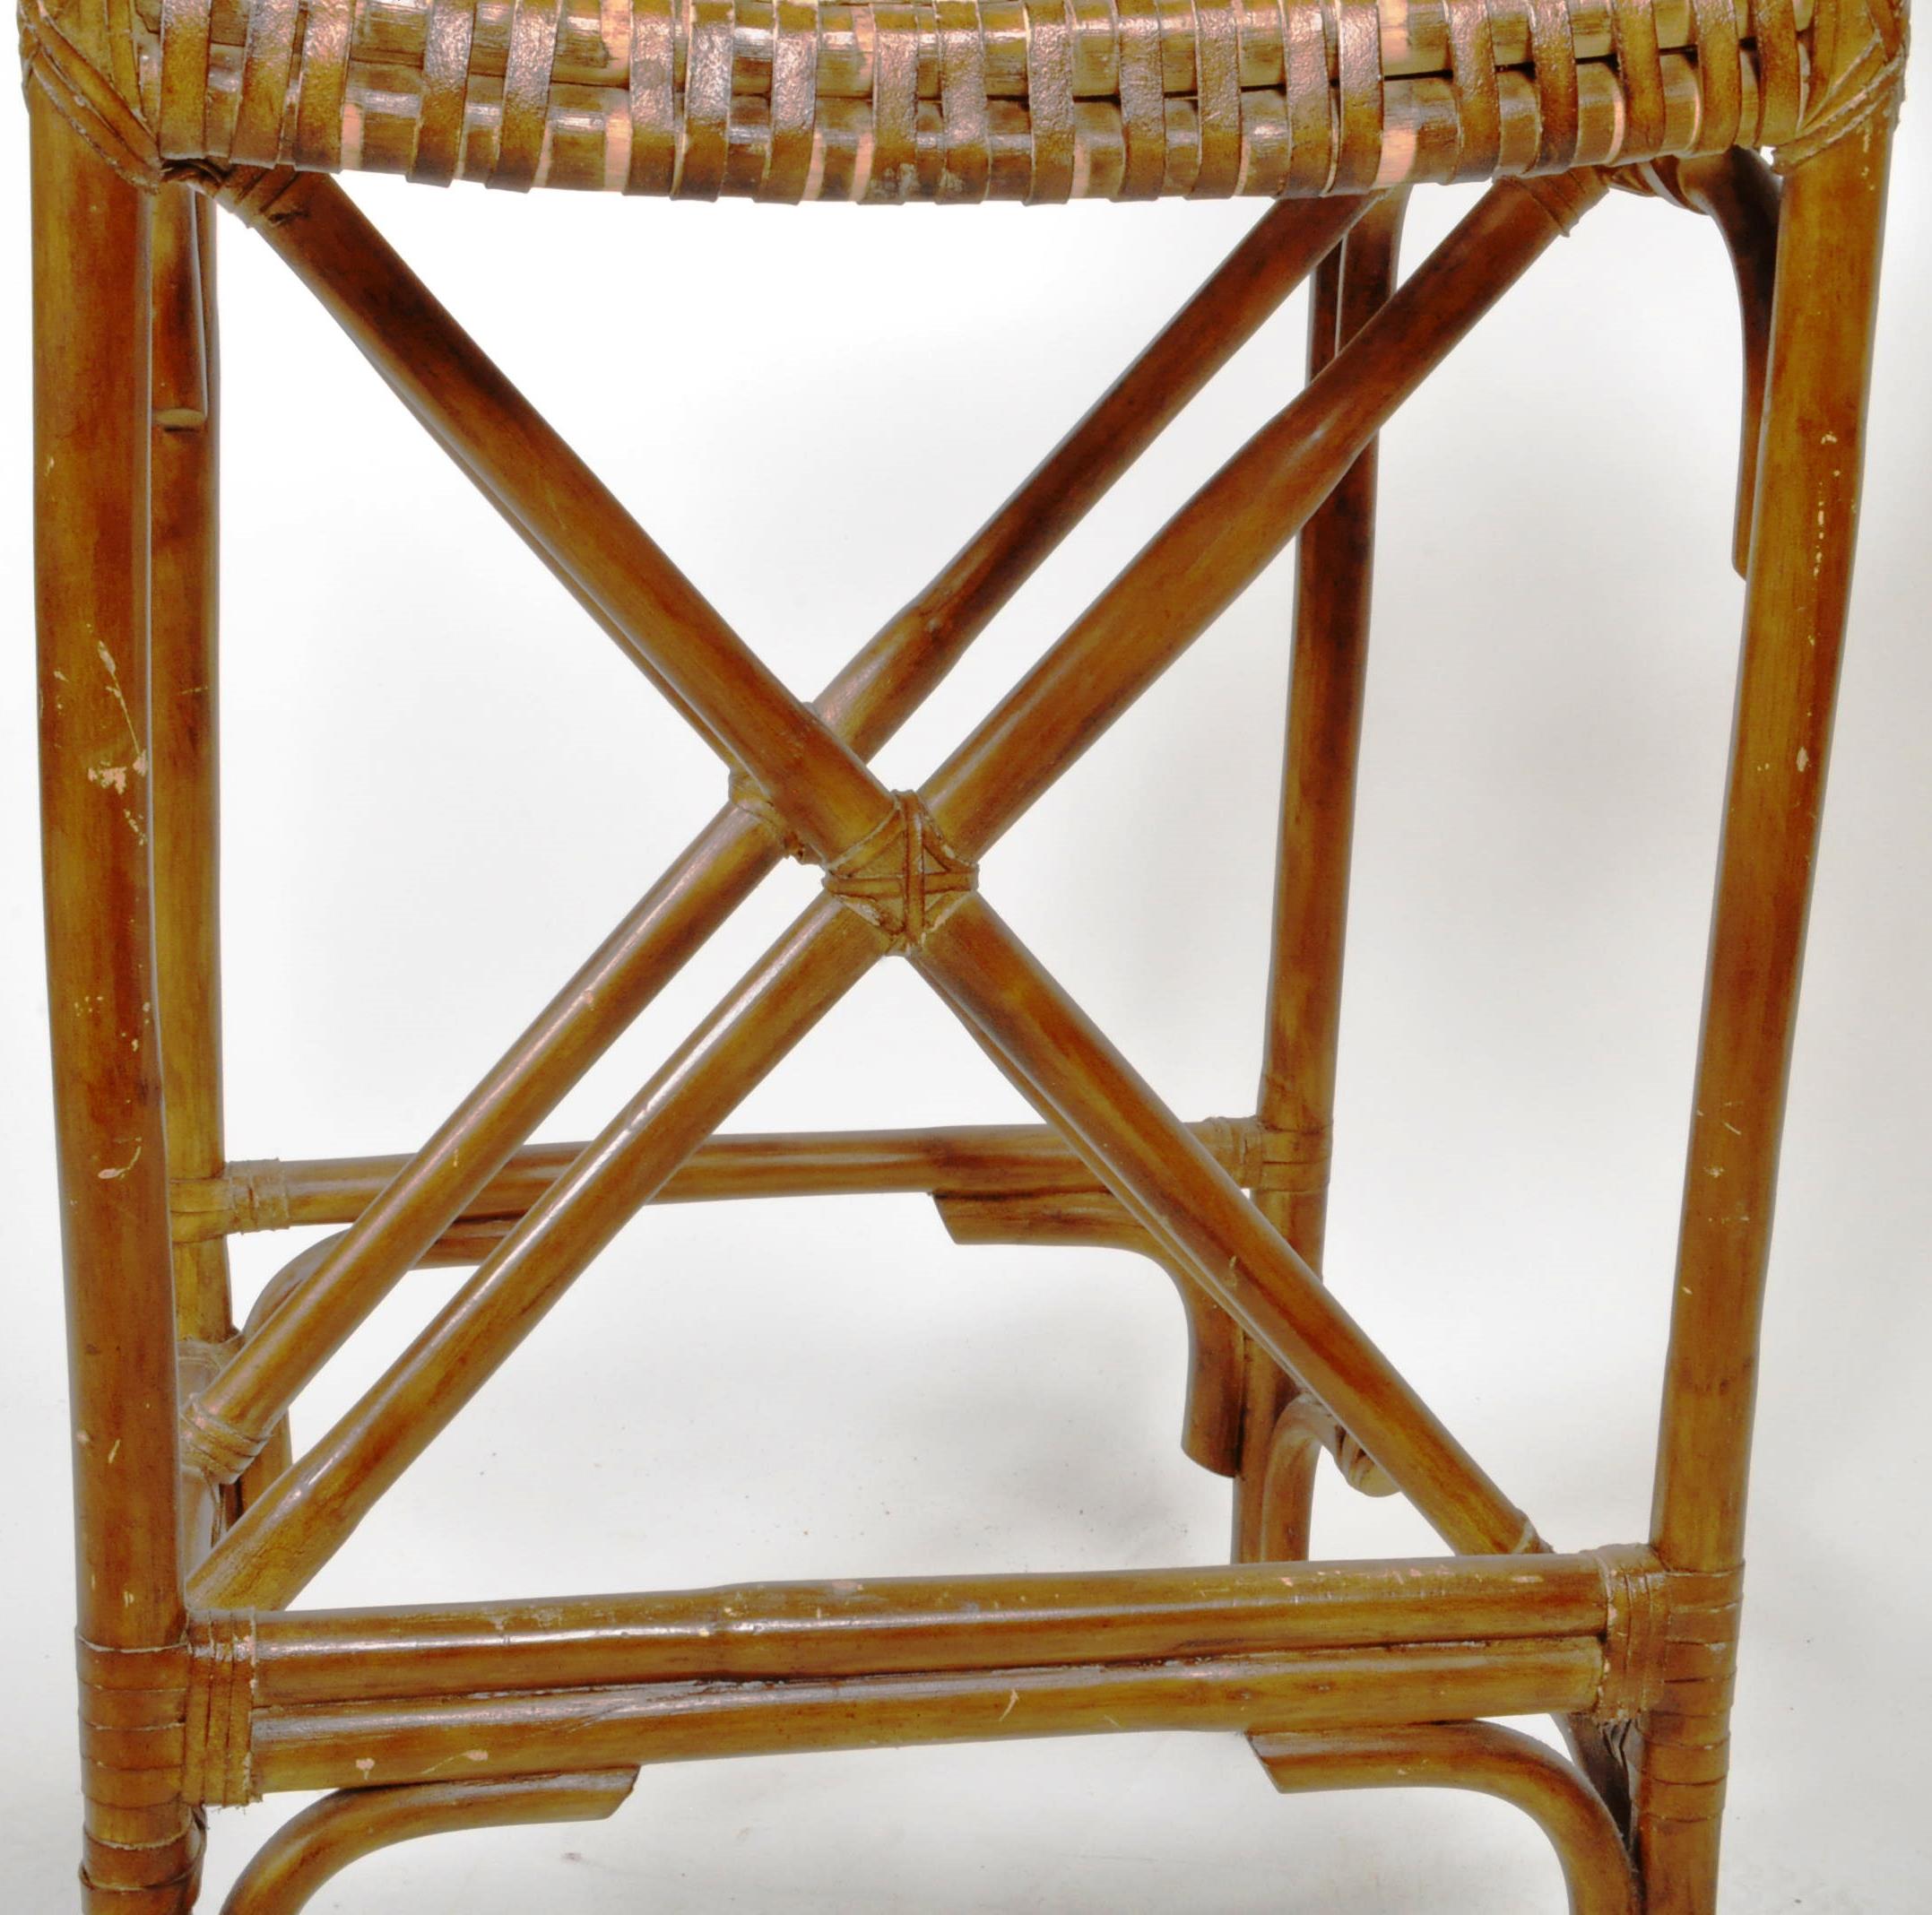 RETRO VINTAGE 1960'S CANE & BAMBOO UMPIRES SEAT TALL CHAIR - Image 4 of 6